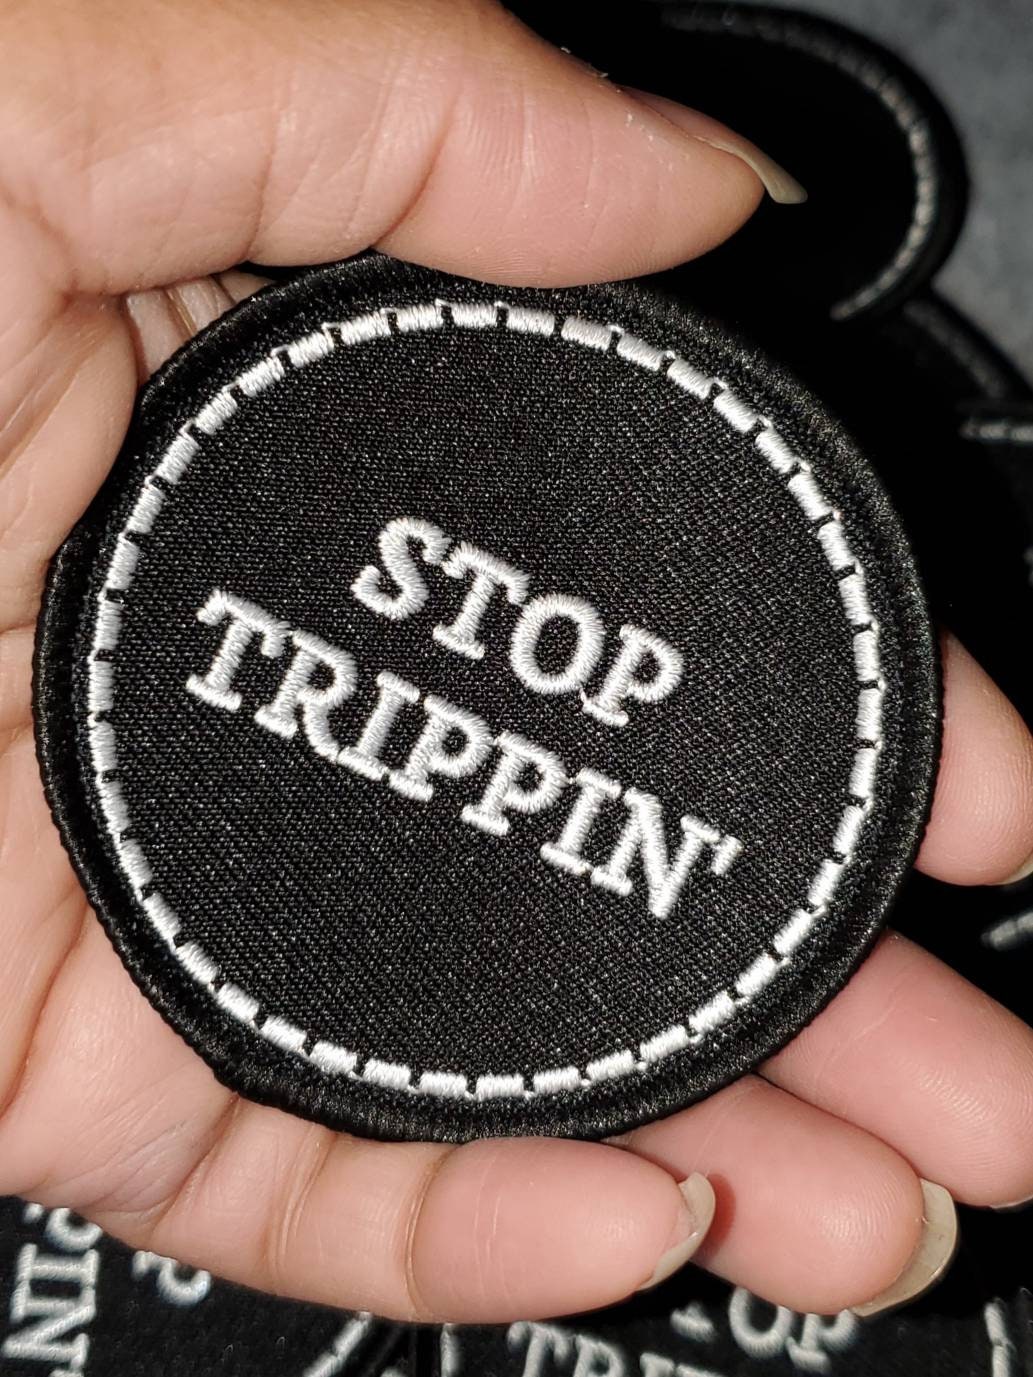 New Arrival,"Stop Trippin" Fun, Black & White, Iron-on Badge, Size 2.75", Cool Statement Patch for Apparel and Accessories, Embroidery